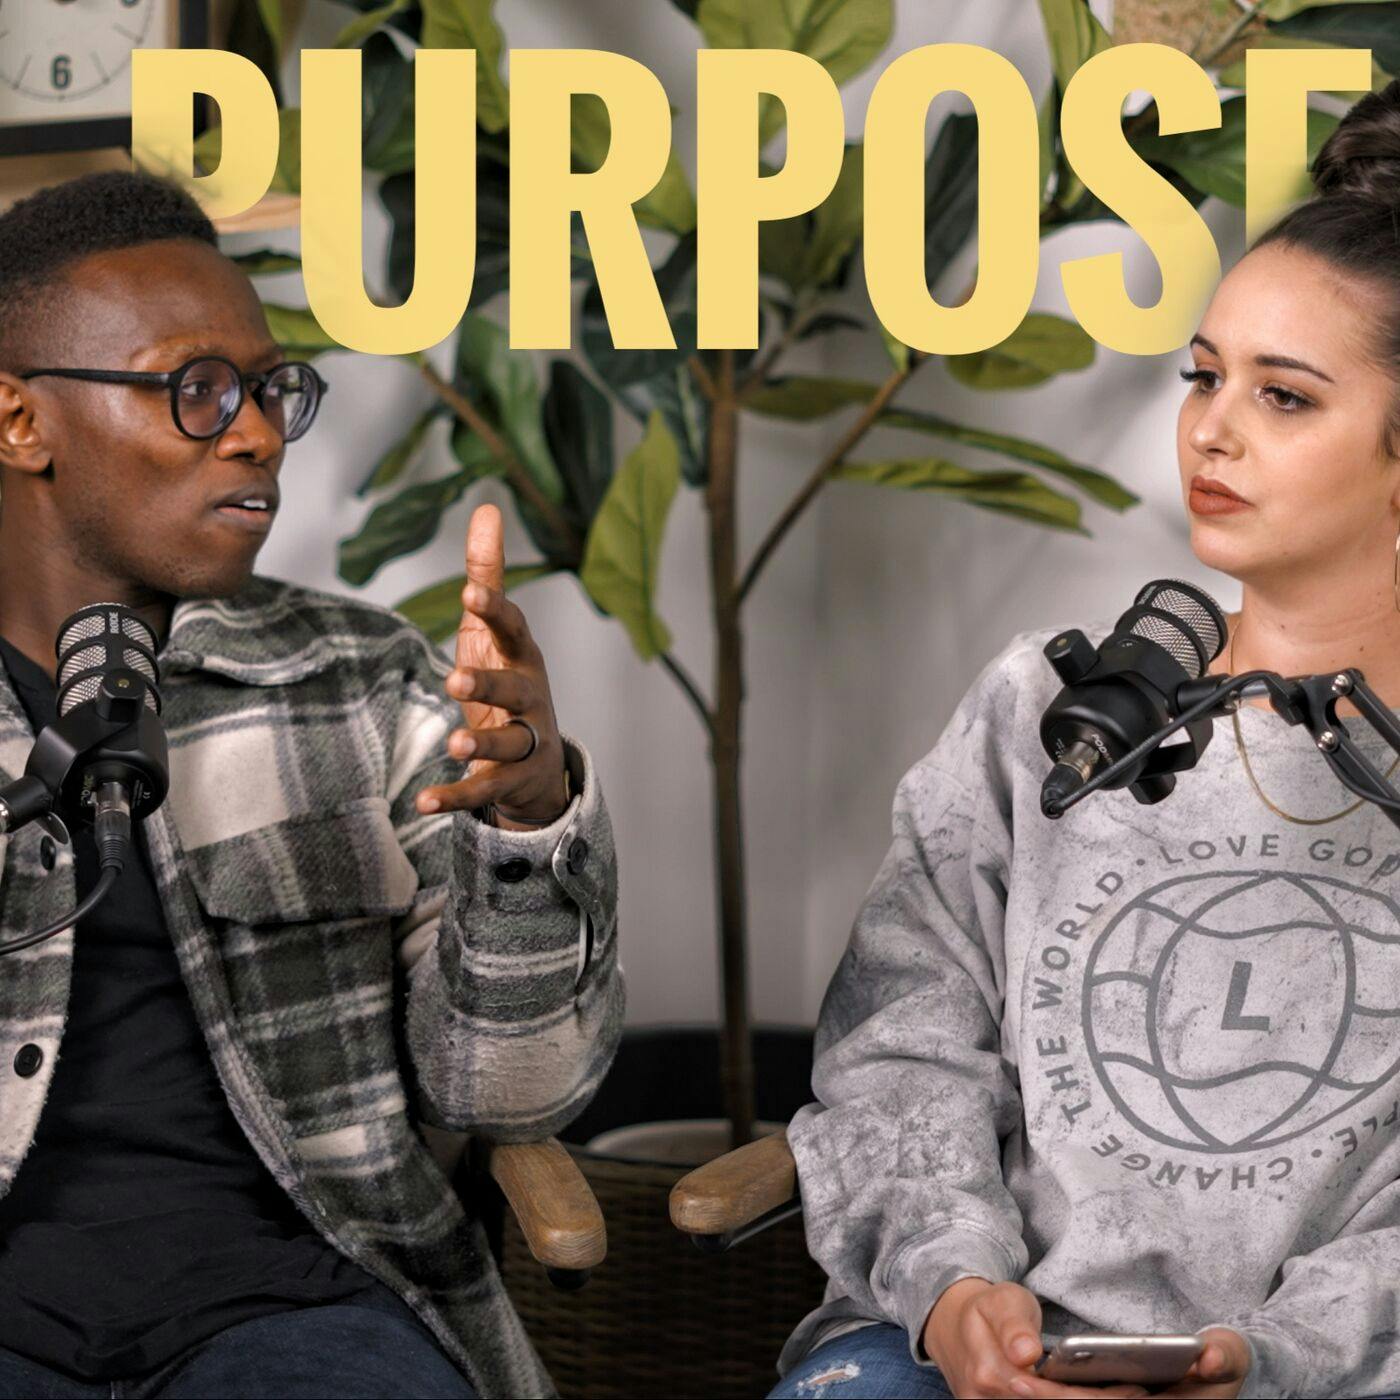 How to Help Your Spouse Find Their Purpose